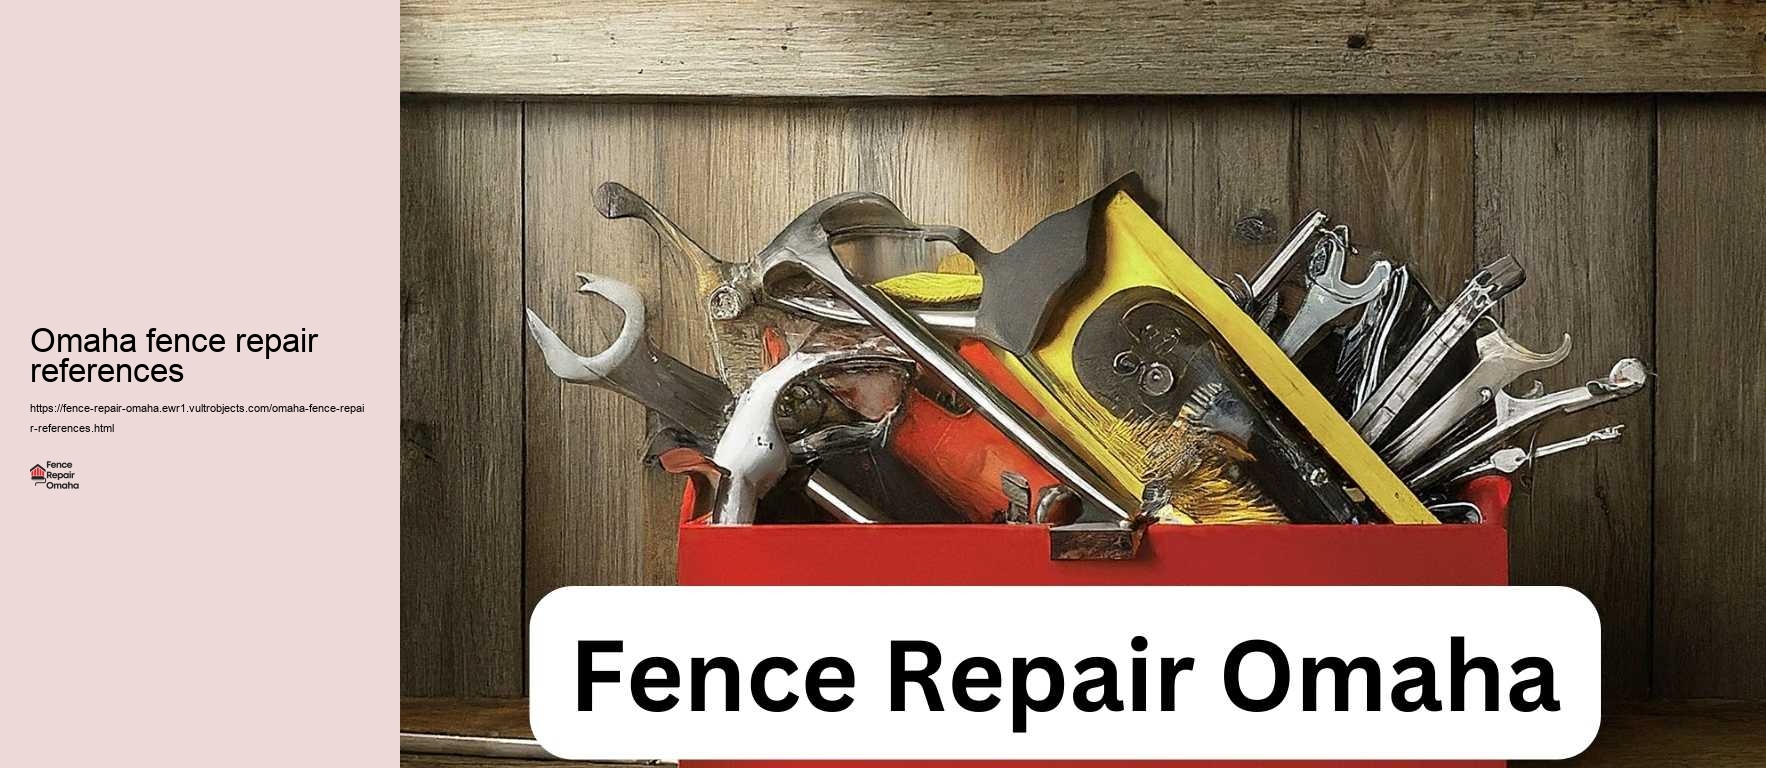 Omaha fence repair references